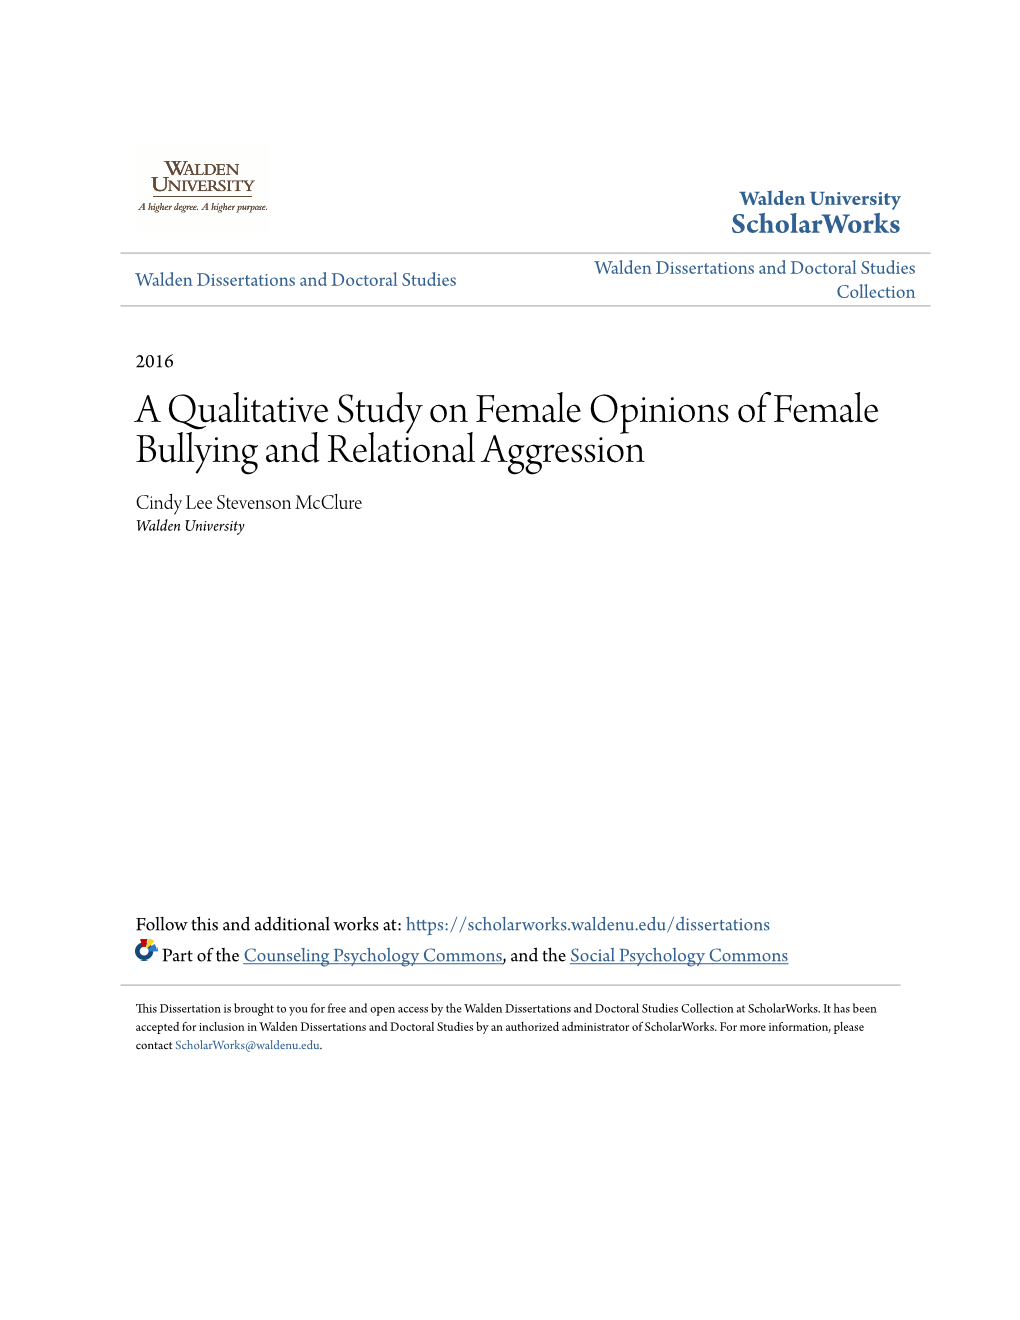 A Qualitative Study on Female Opinions of Female Bullying and Relational Aggression Cindy Lee Stevenson Mcclure Walden University